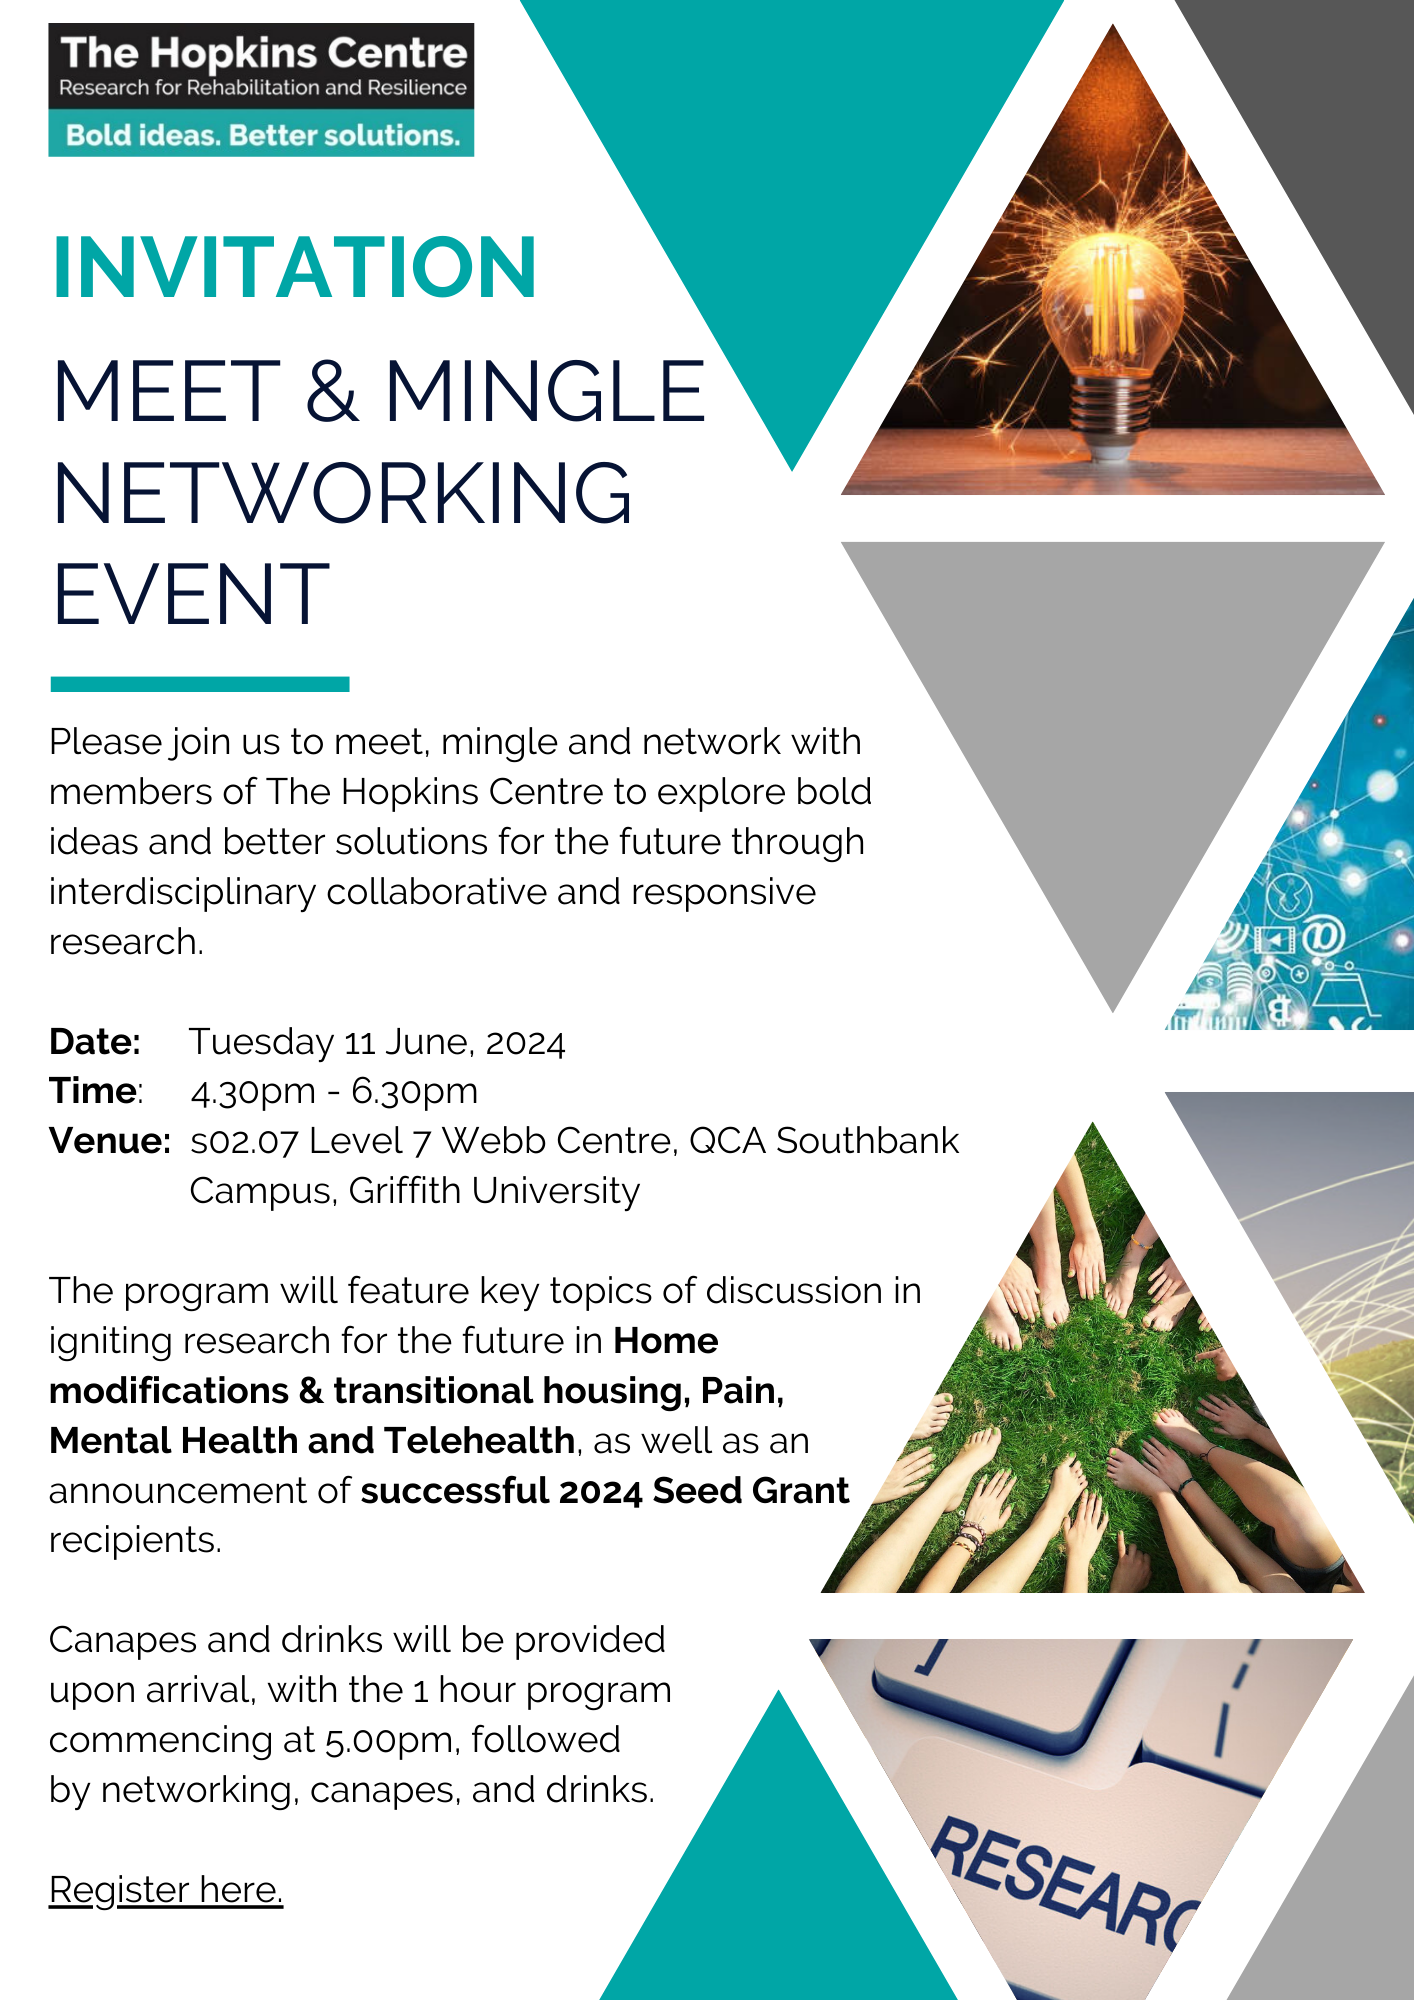 Event flyer, with the event information detailed to the left hand side and decorative triangles with blocks of colour and images on the right hand side. The flyer contains a link to register for this event: https://forms.office.com/Pages/ResponsePage.aspx?id=q8h8Wtykm0-_YGZxQEmtYkFsTGMAMqZDtNzWDAaJ-FpUQVQ0REwySlNUUUZDTzZMTkgxQ0I1S1ZSVi4u